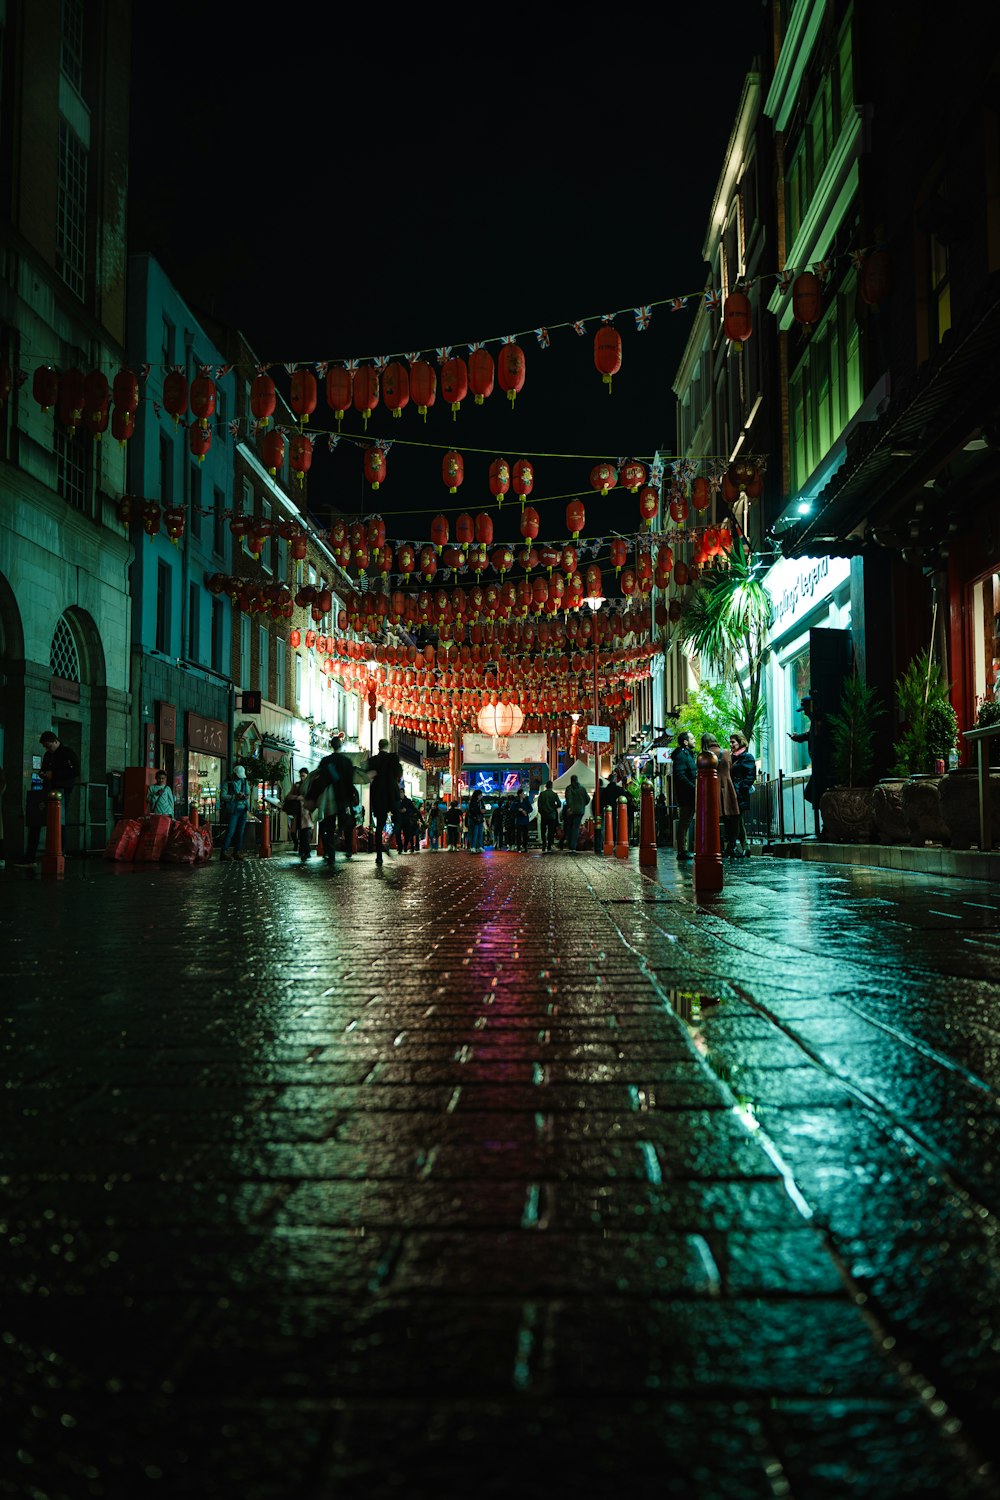 a city street at night with lanterns strung over it